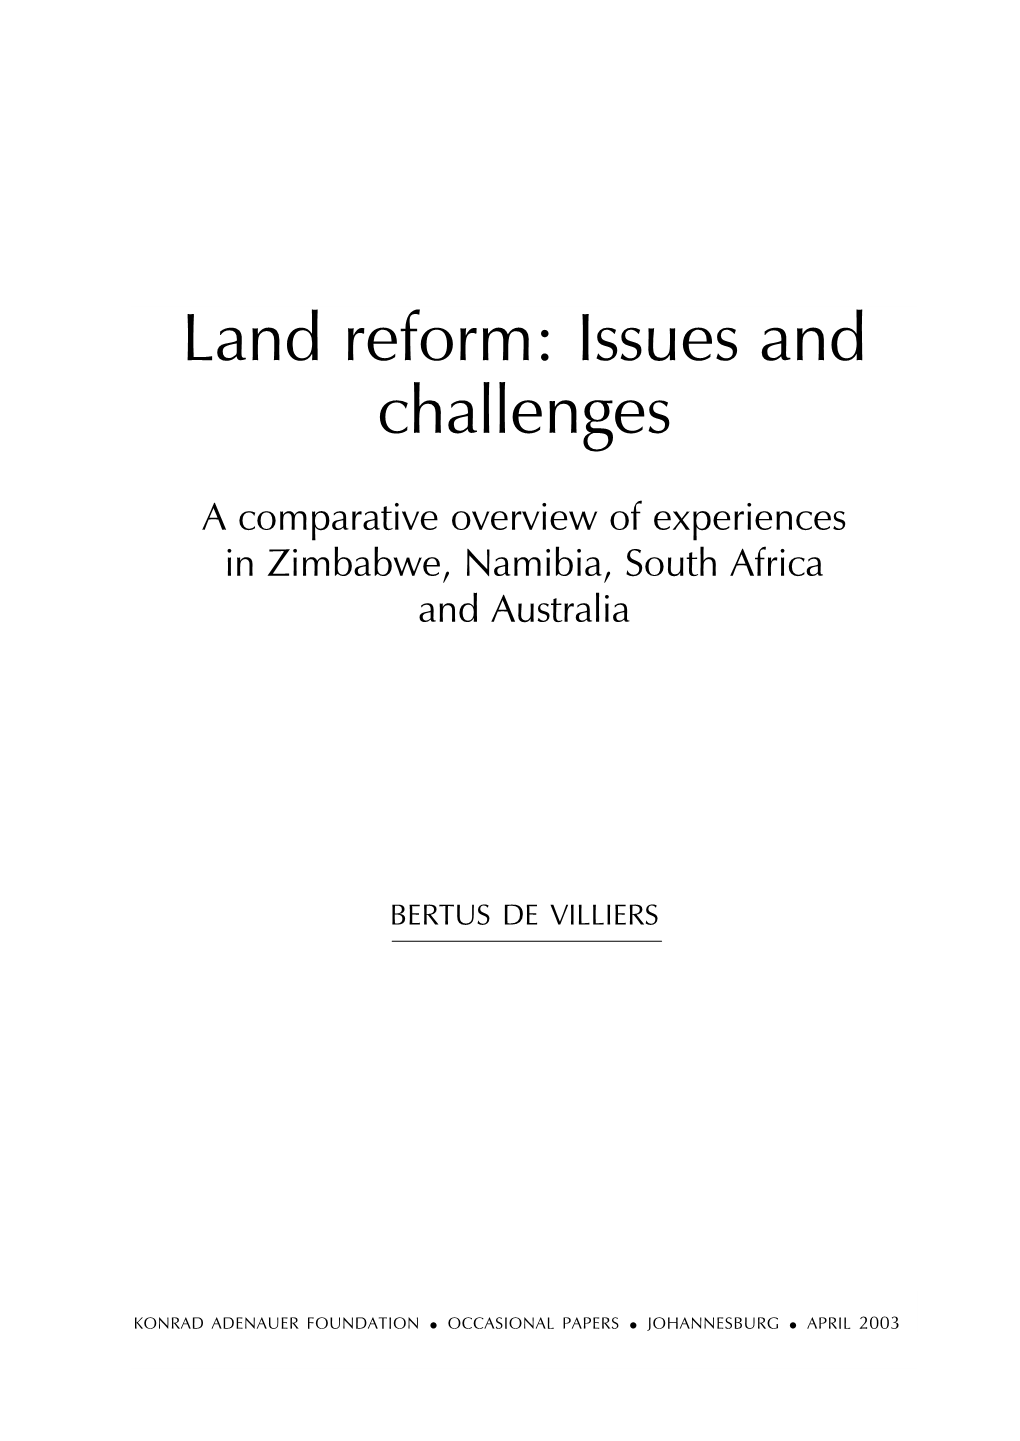 Land Reform: Issues and Challenges